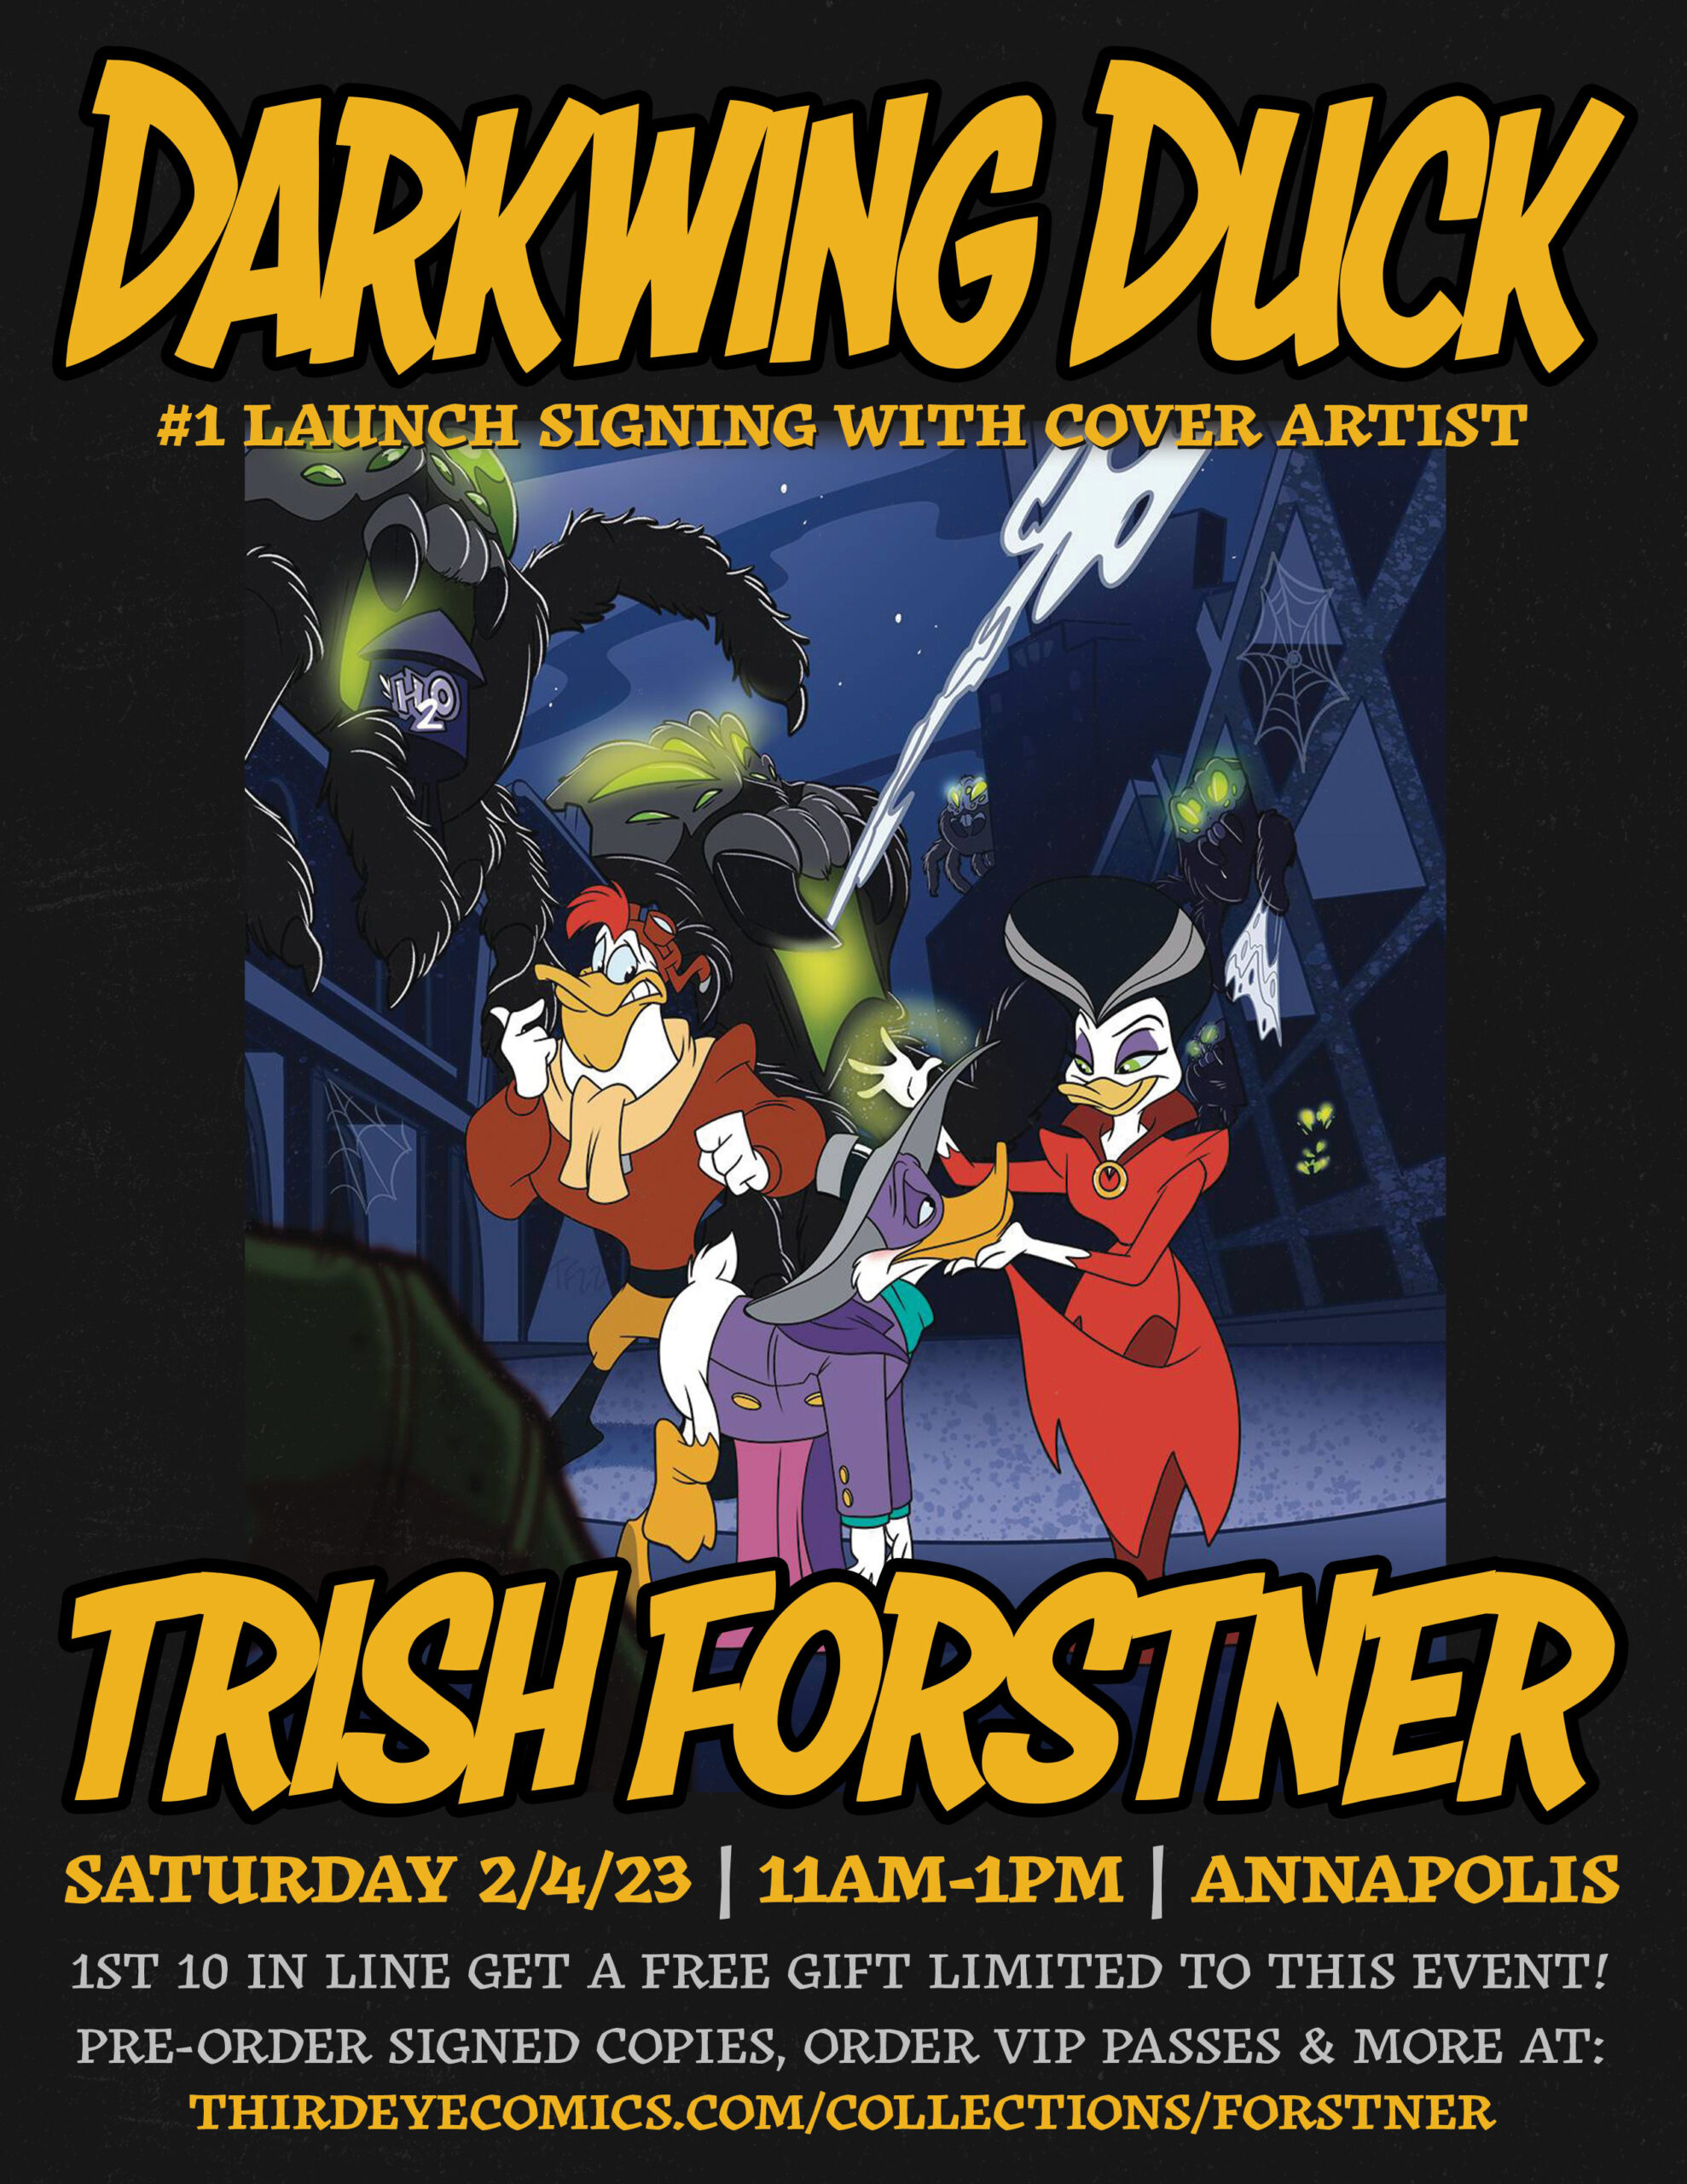 Darkwing Duck #1 launch signing flyer